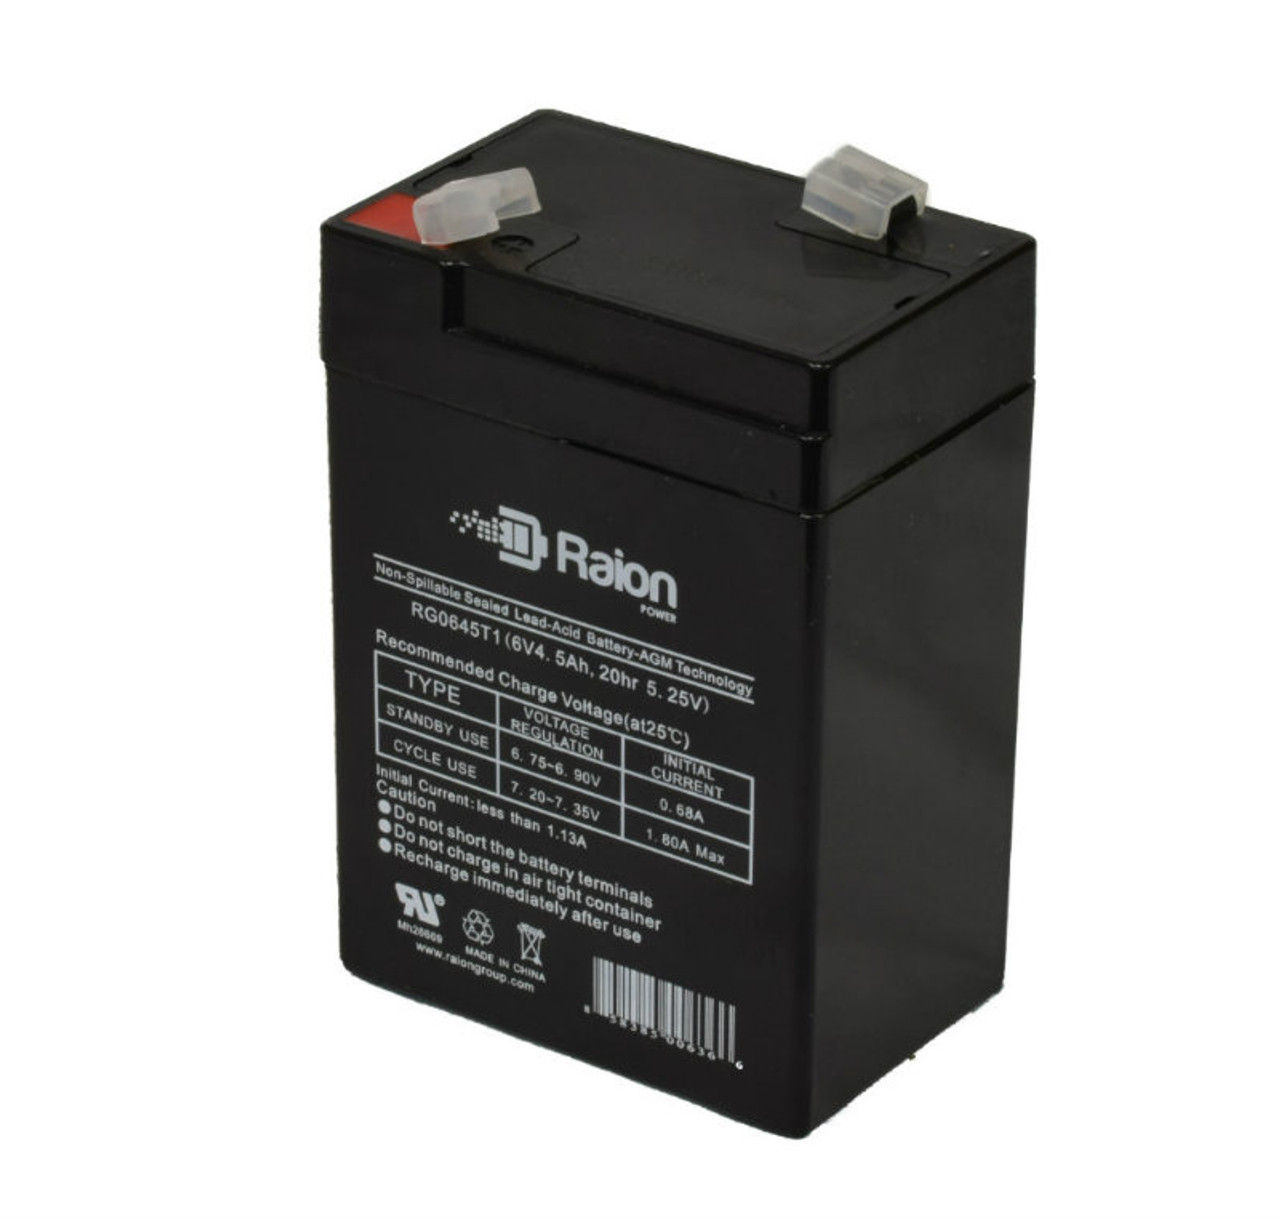 Raion Power RG0645T1 6V 4.5Ah Replacement Battery Cartridge for ROBITON VRLA6-4.5-S